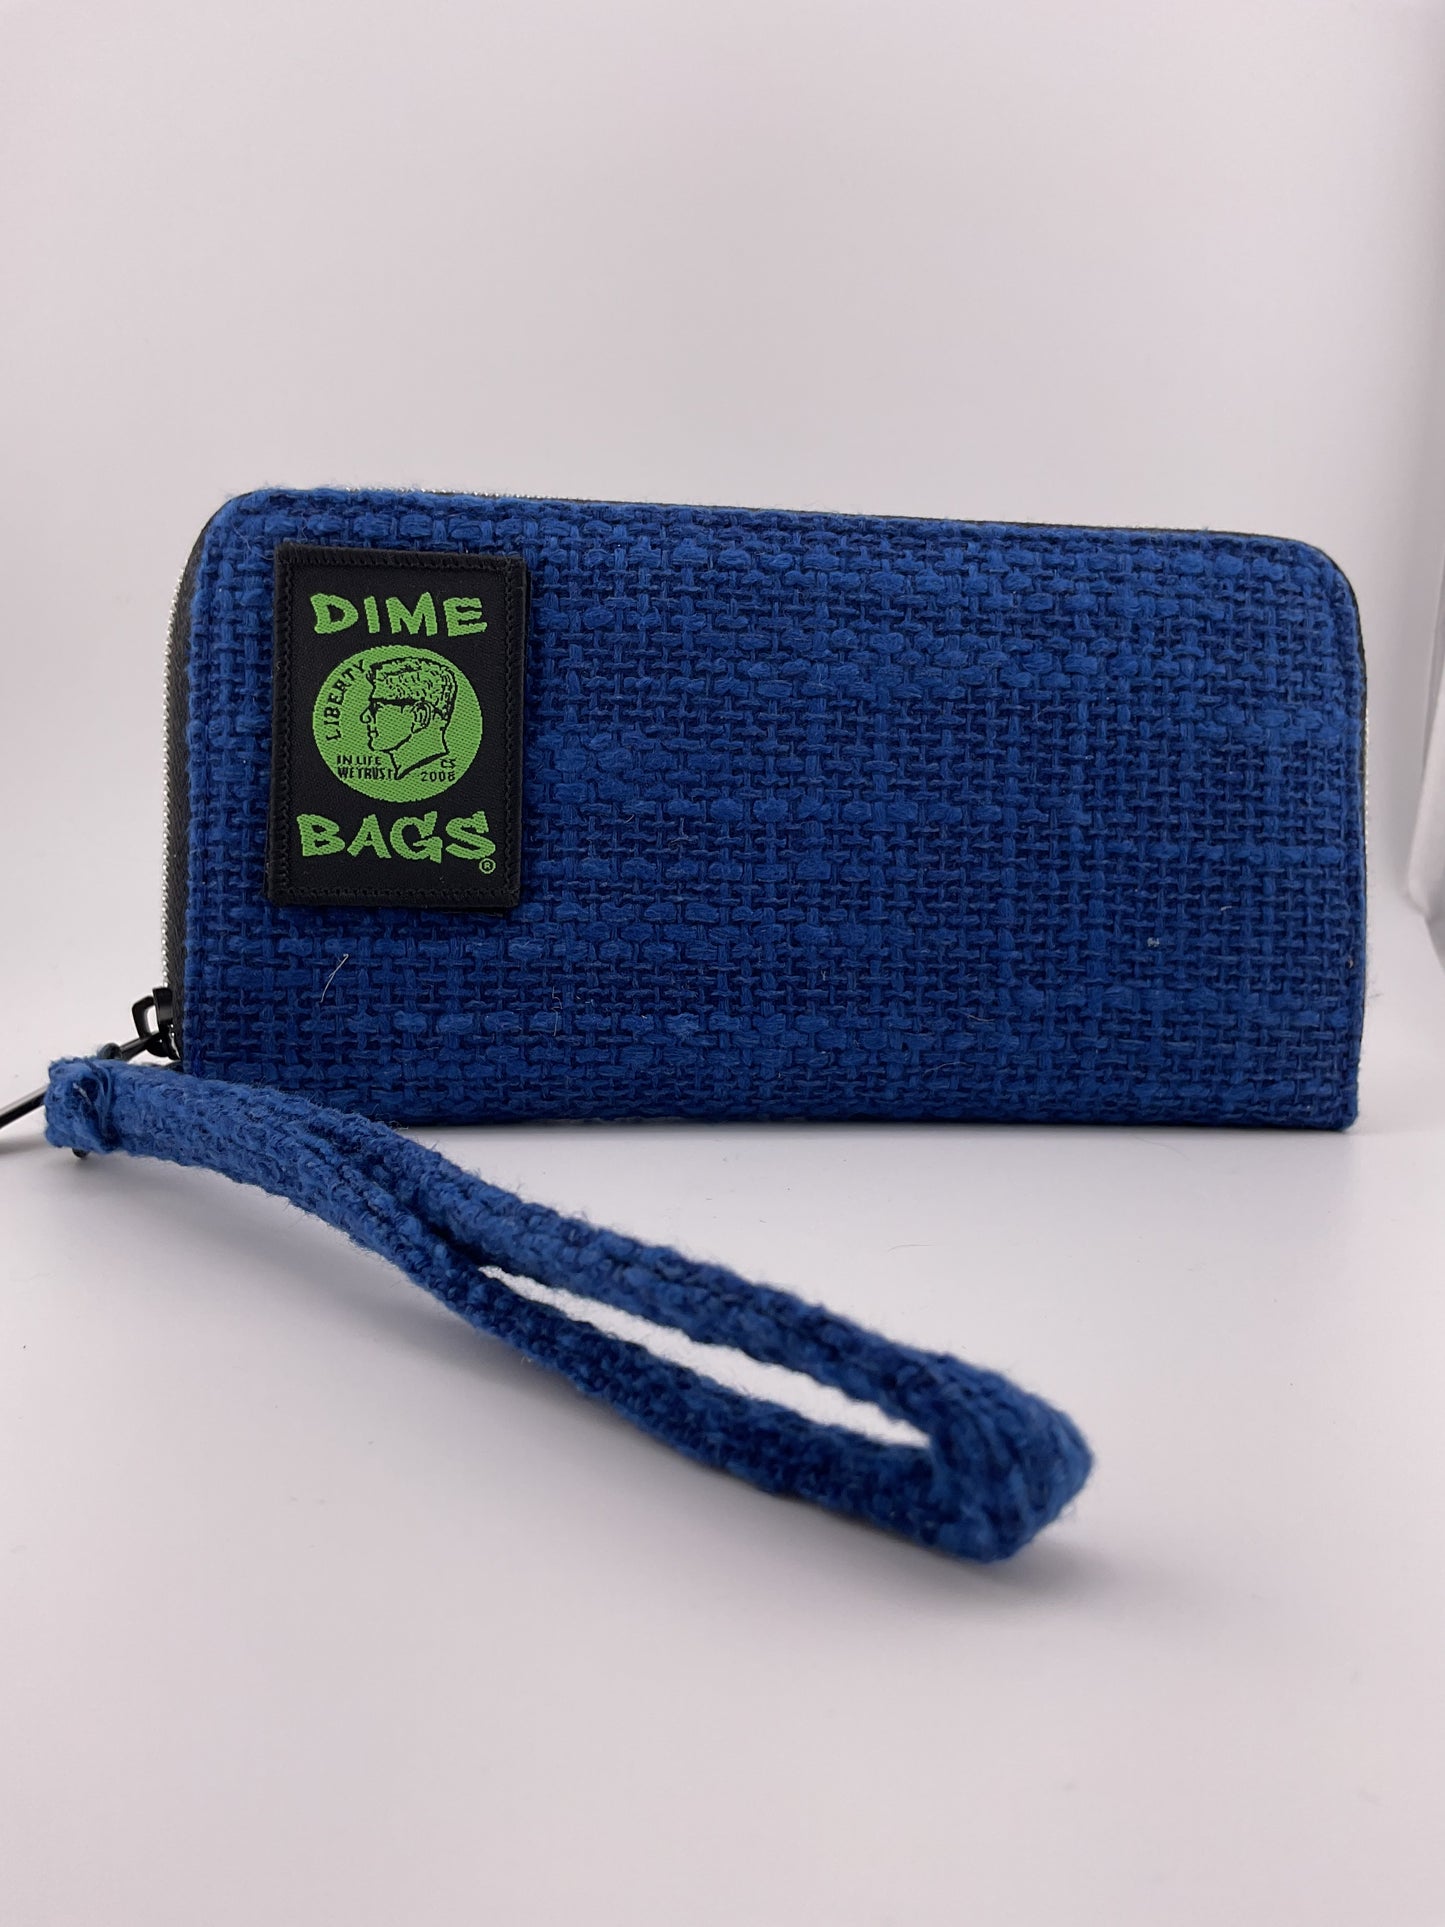 DIME BAGS Wristlet Wallet - RFID-Blocking Carrying Case with Secure Zipper and Wristlet Loop